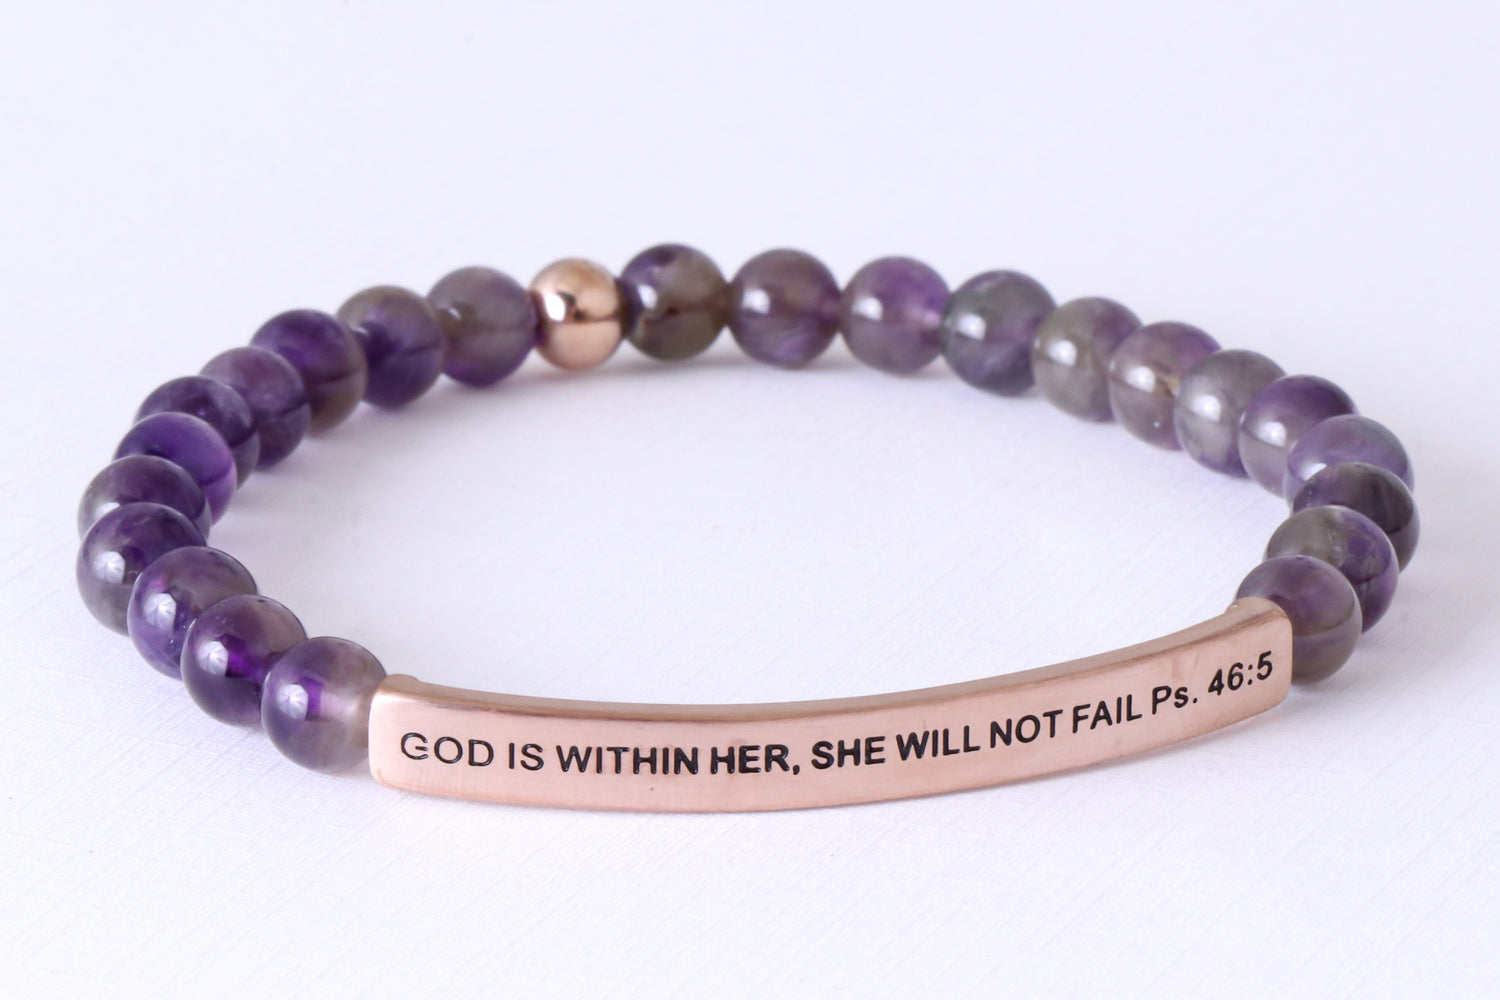 GOD IS WITHIN HER SHE WILL NOT FAIL - Psalms 46:5 (POS)